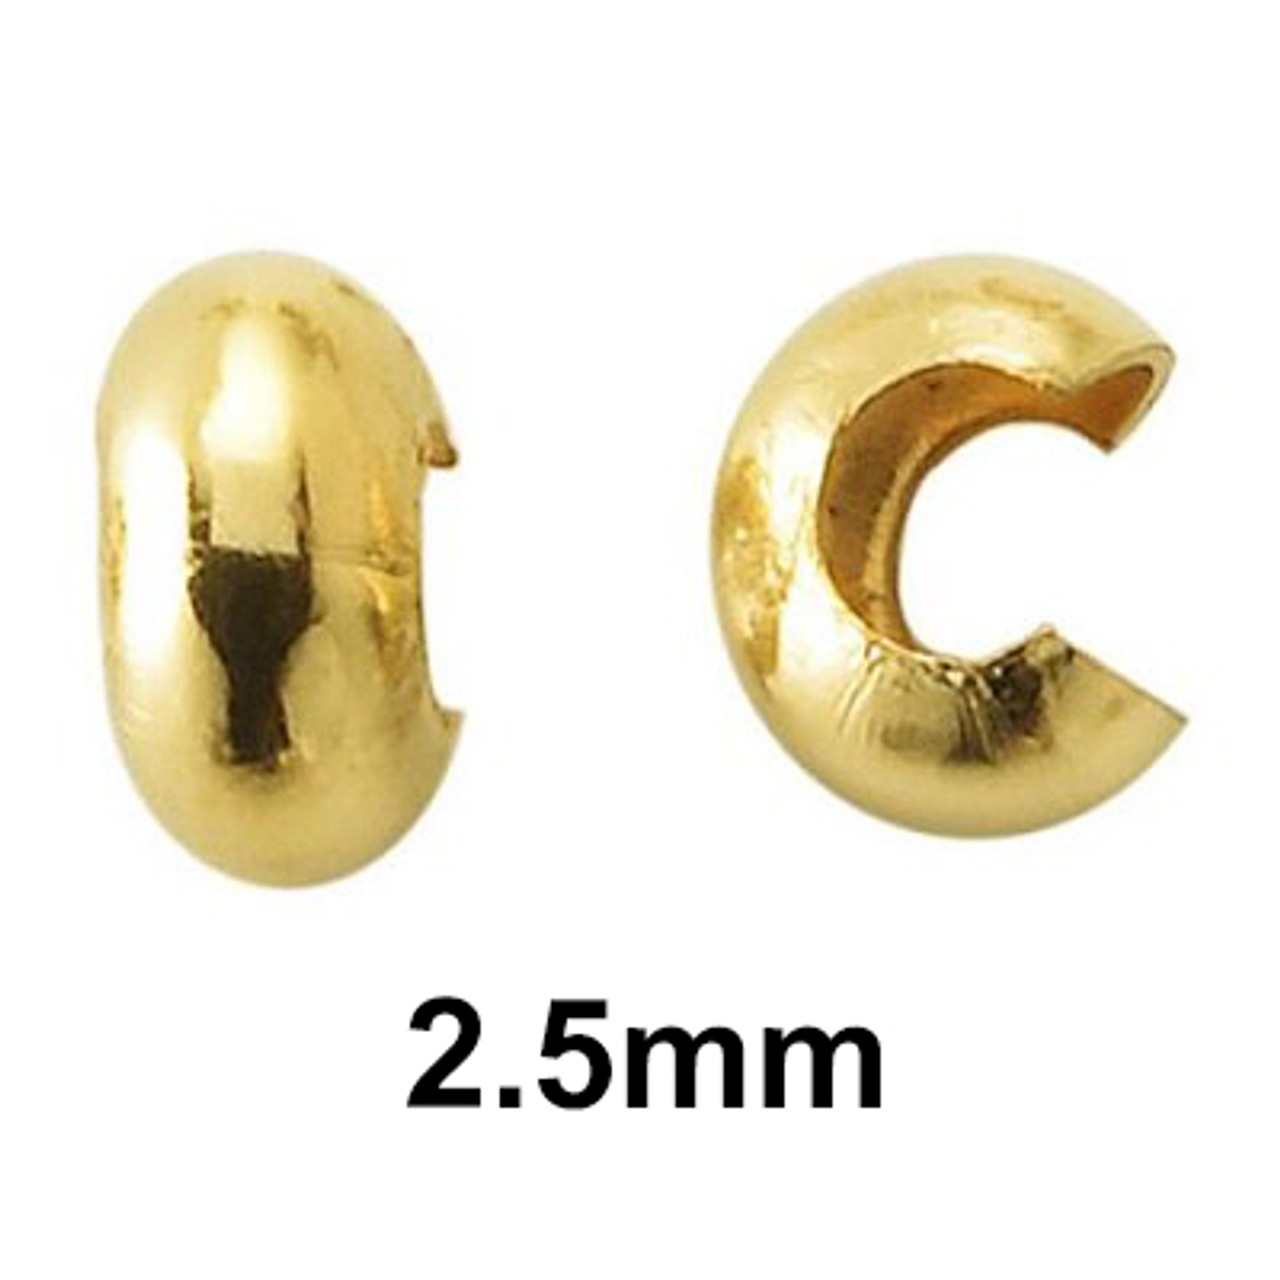 2.5mm 12k gold filled crimp covers aka open balls. Perfect for the DIYer and custom jewelery maker.